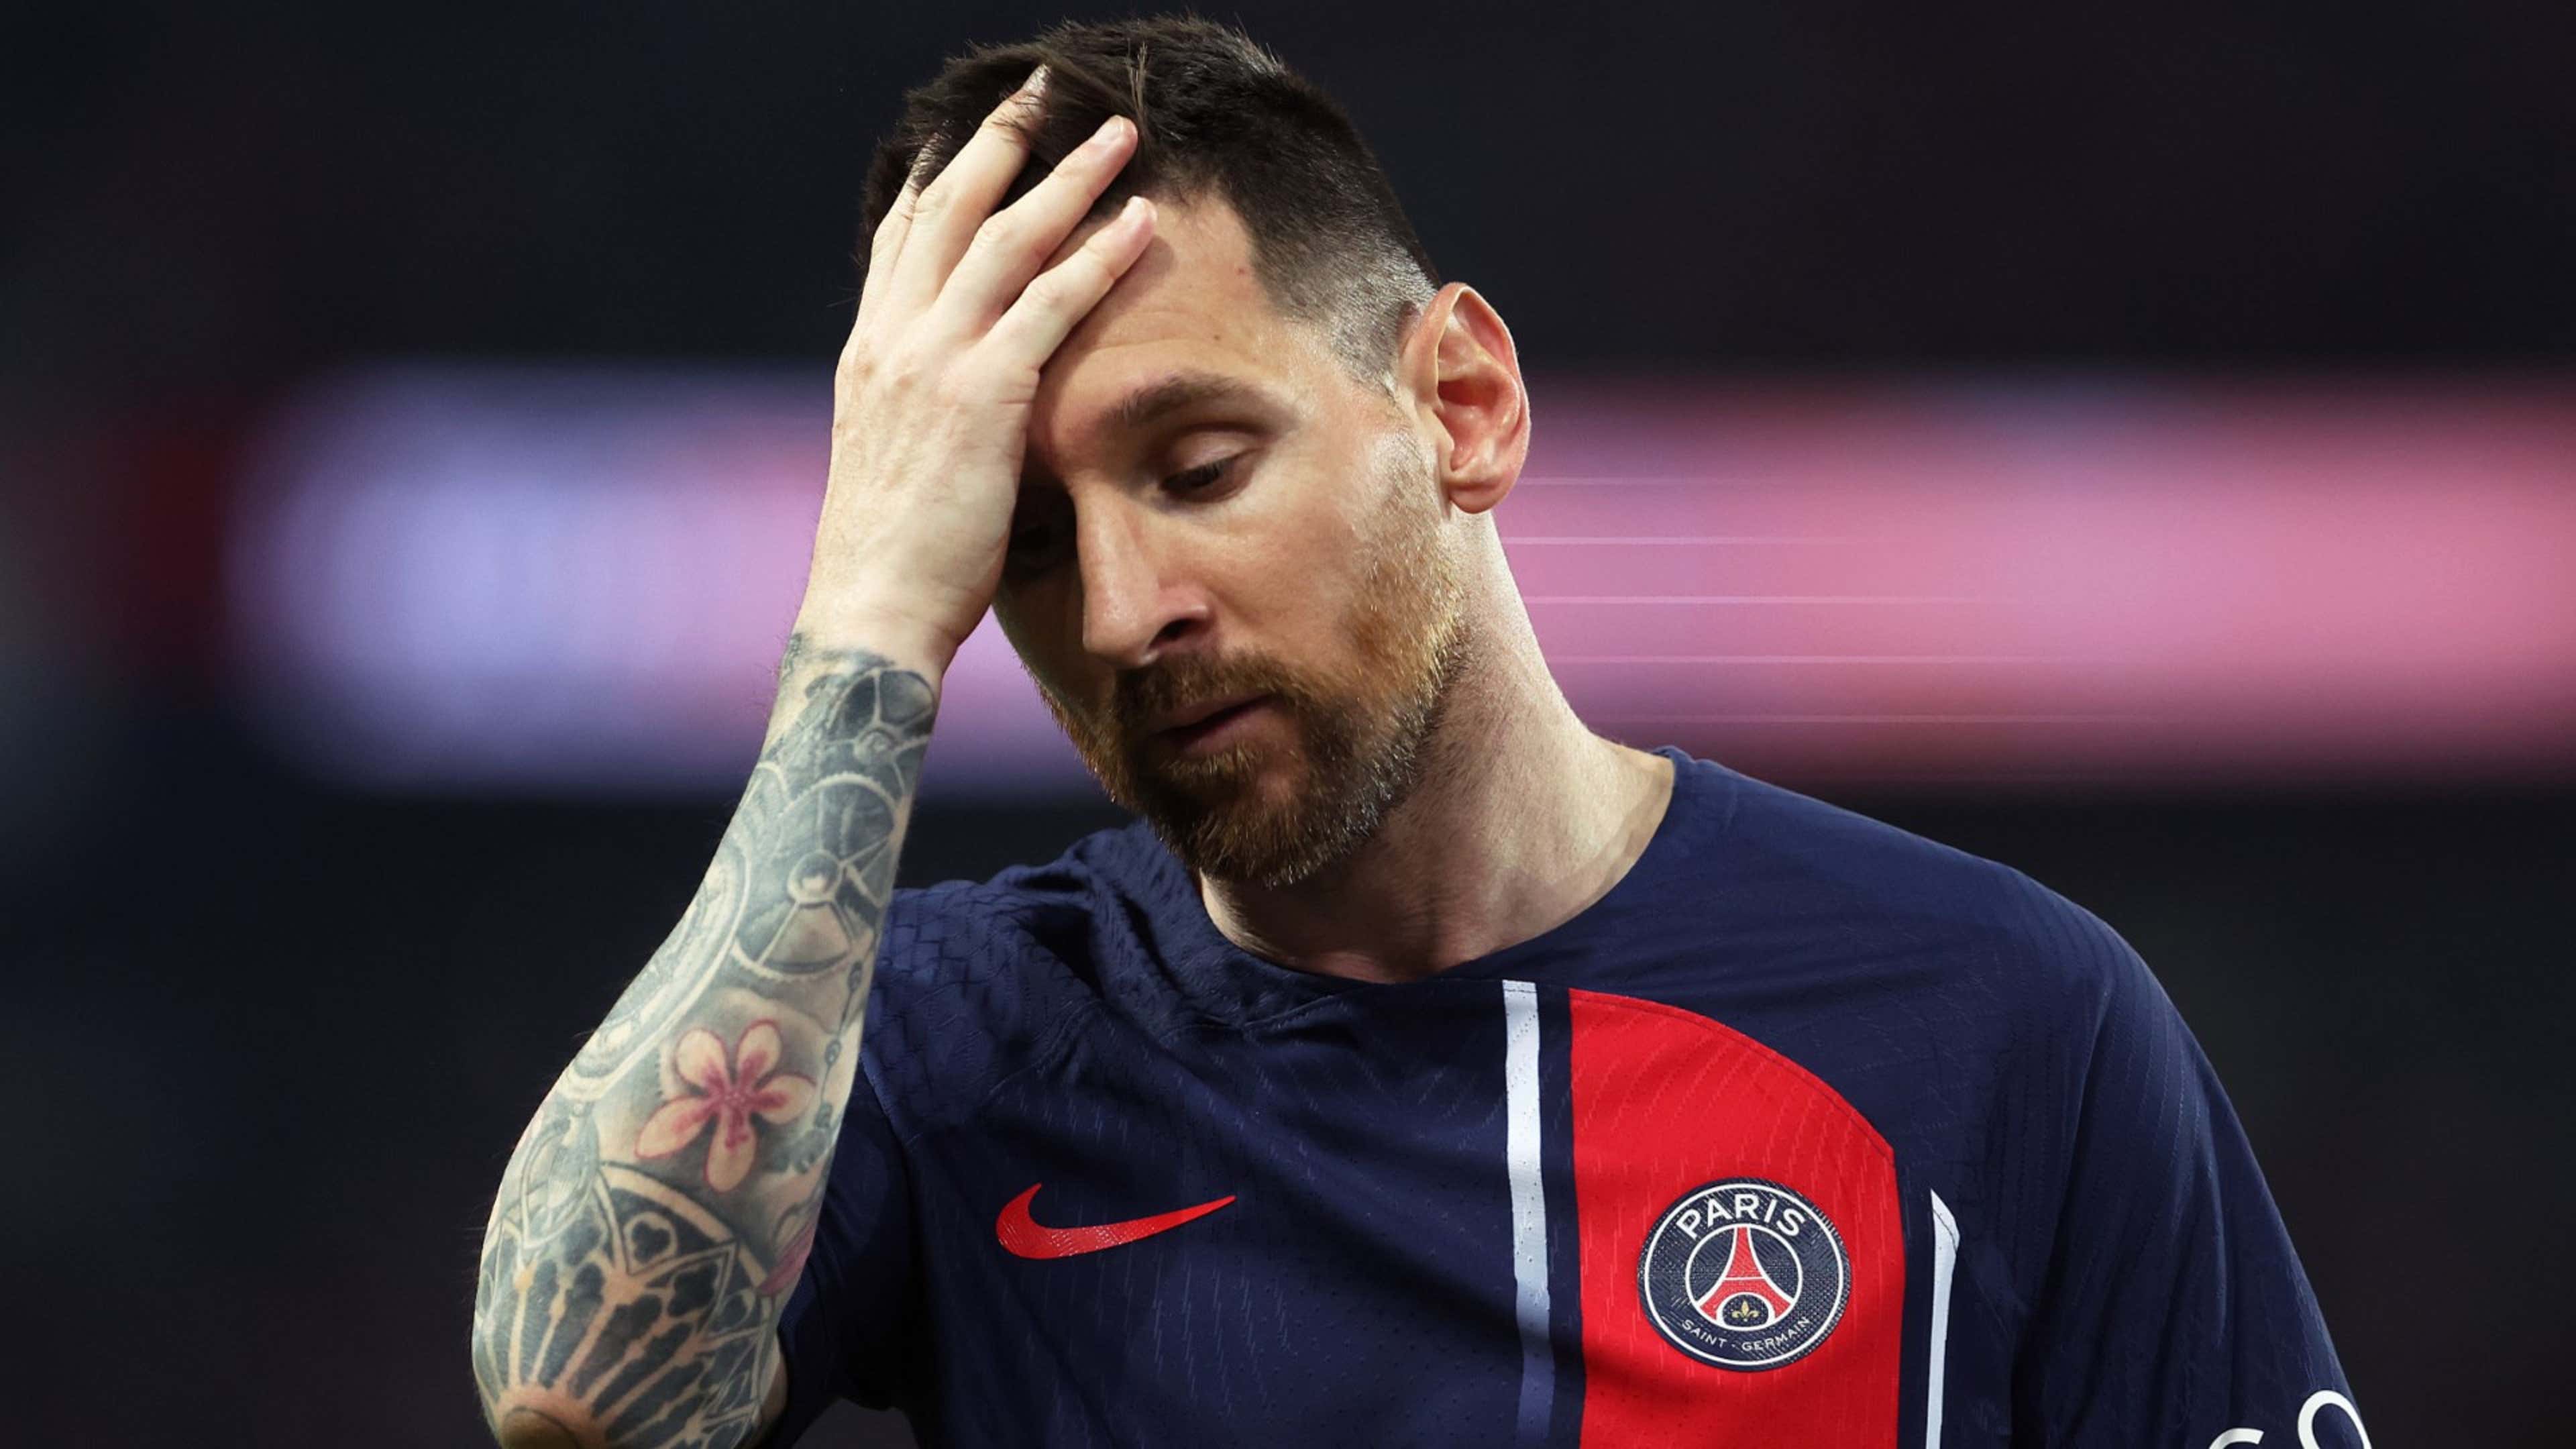 PSG superstar Lionel Messi wants Barcelona to keep experienced